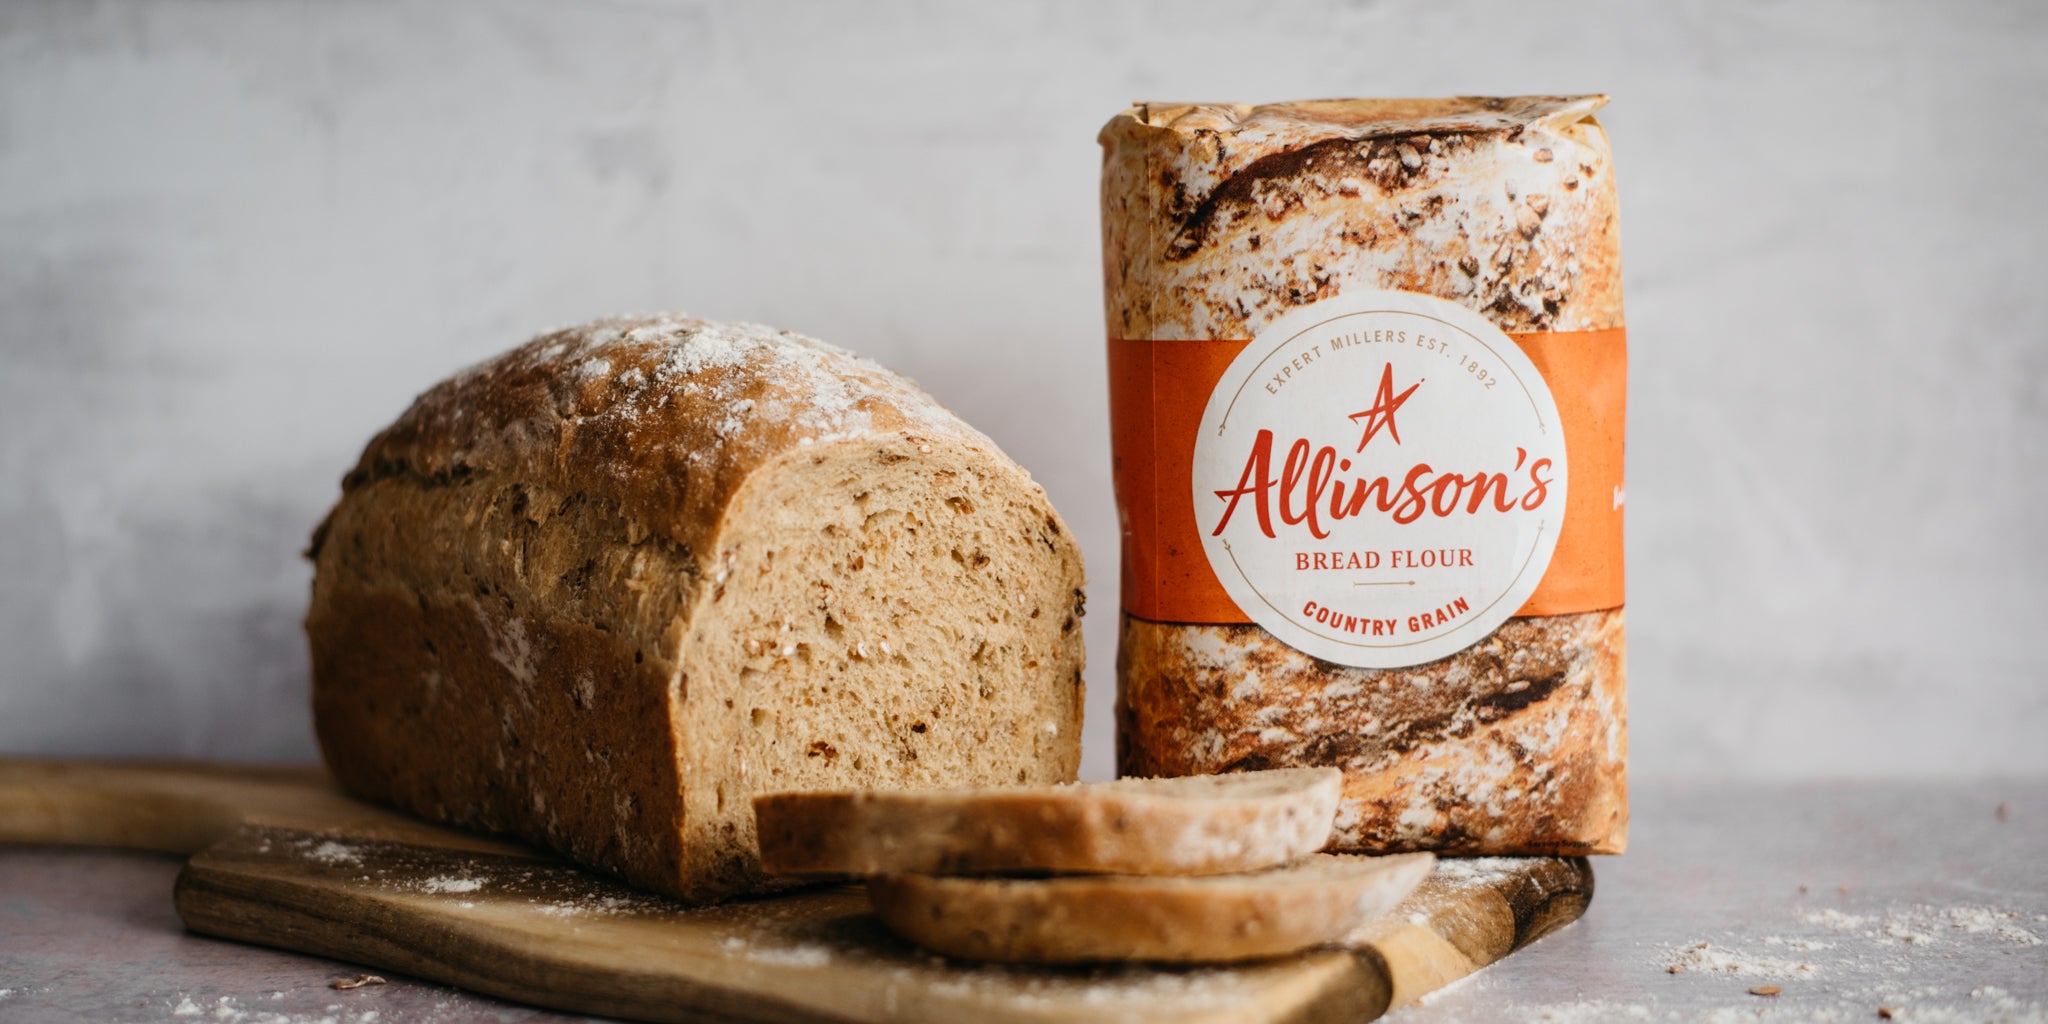 Farmhouse Country Grain Loaf sliced on a serving board, next to a bag of Allinson's Country Grain flour